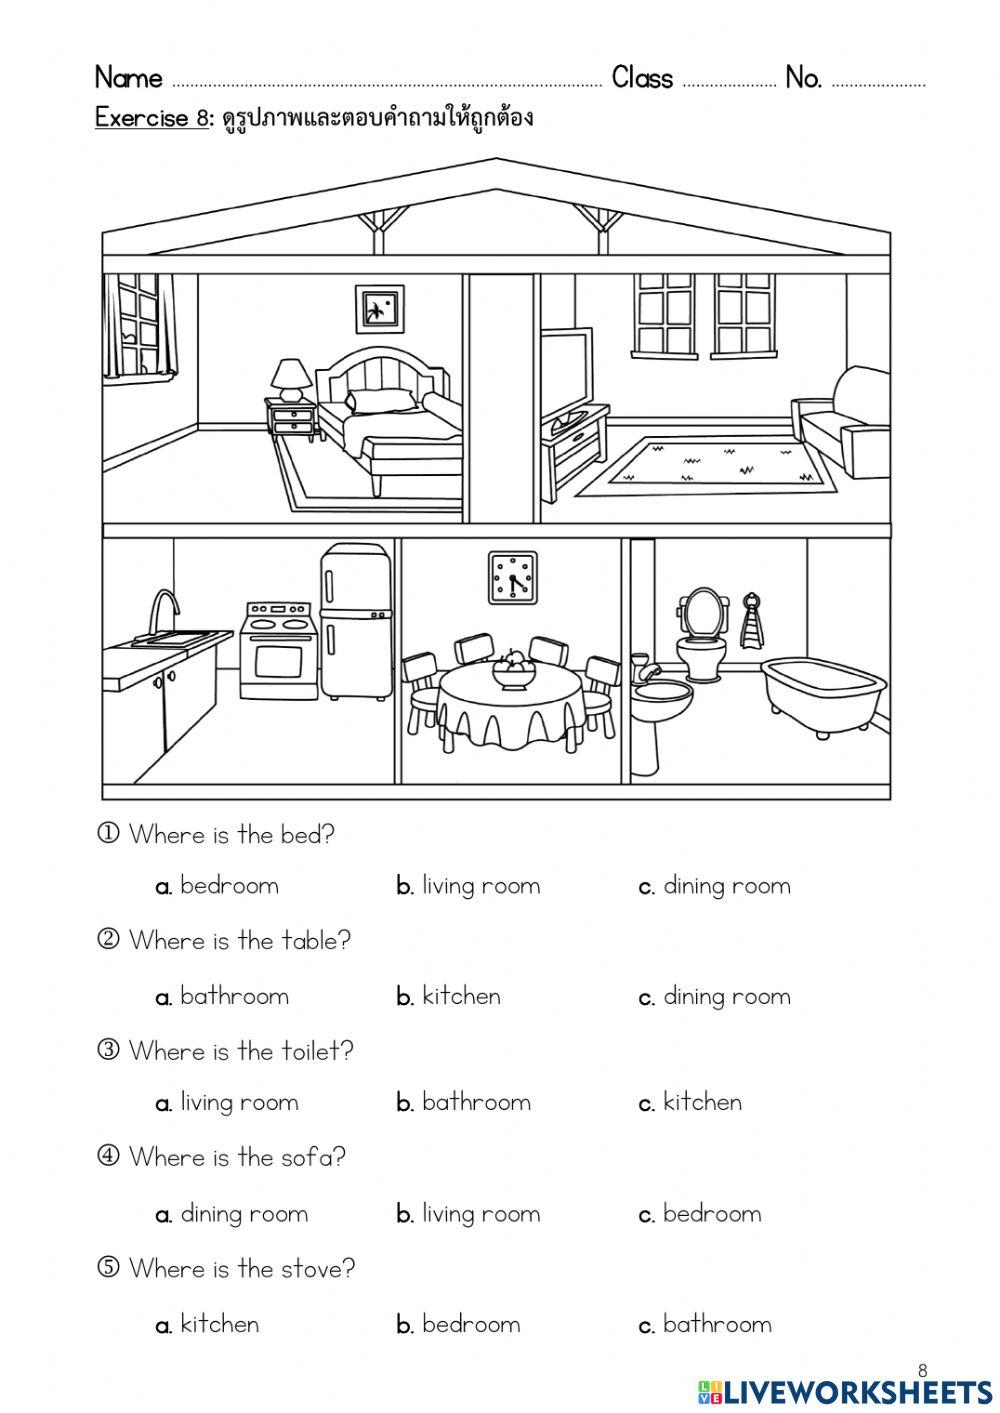 room in my house 1 online exercise for | Live Worksheets